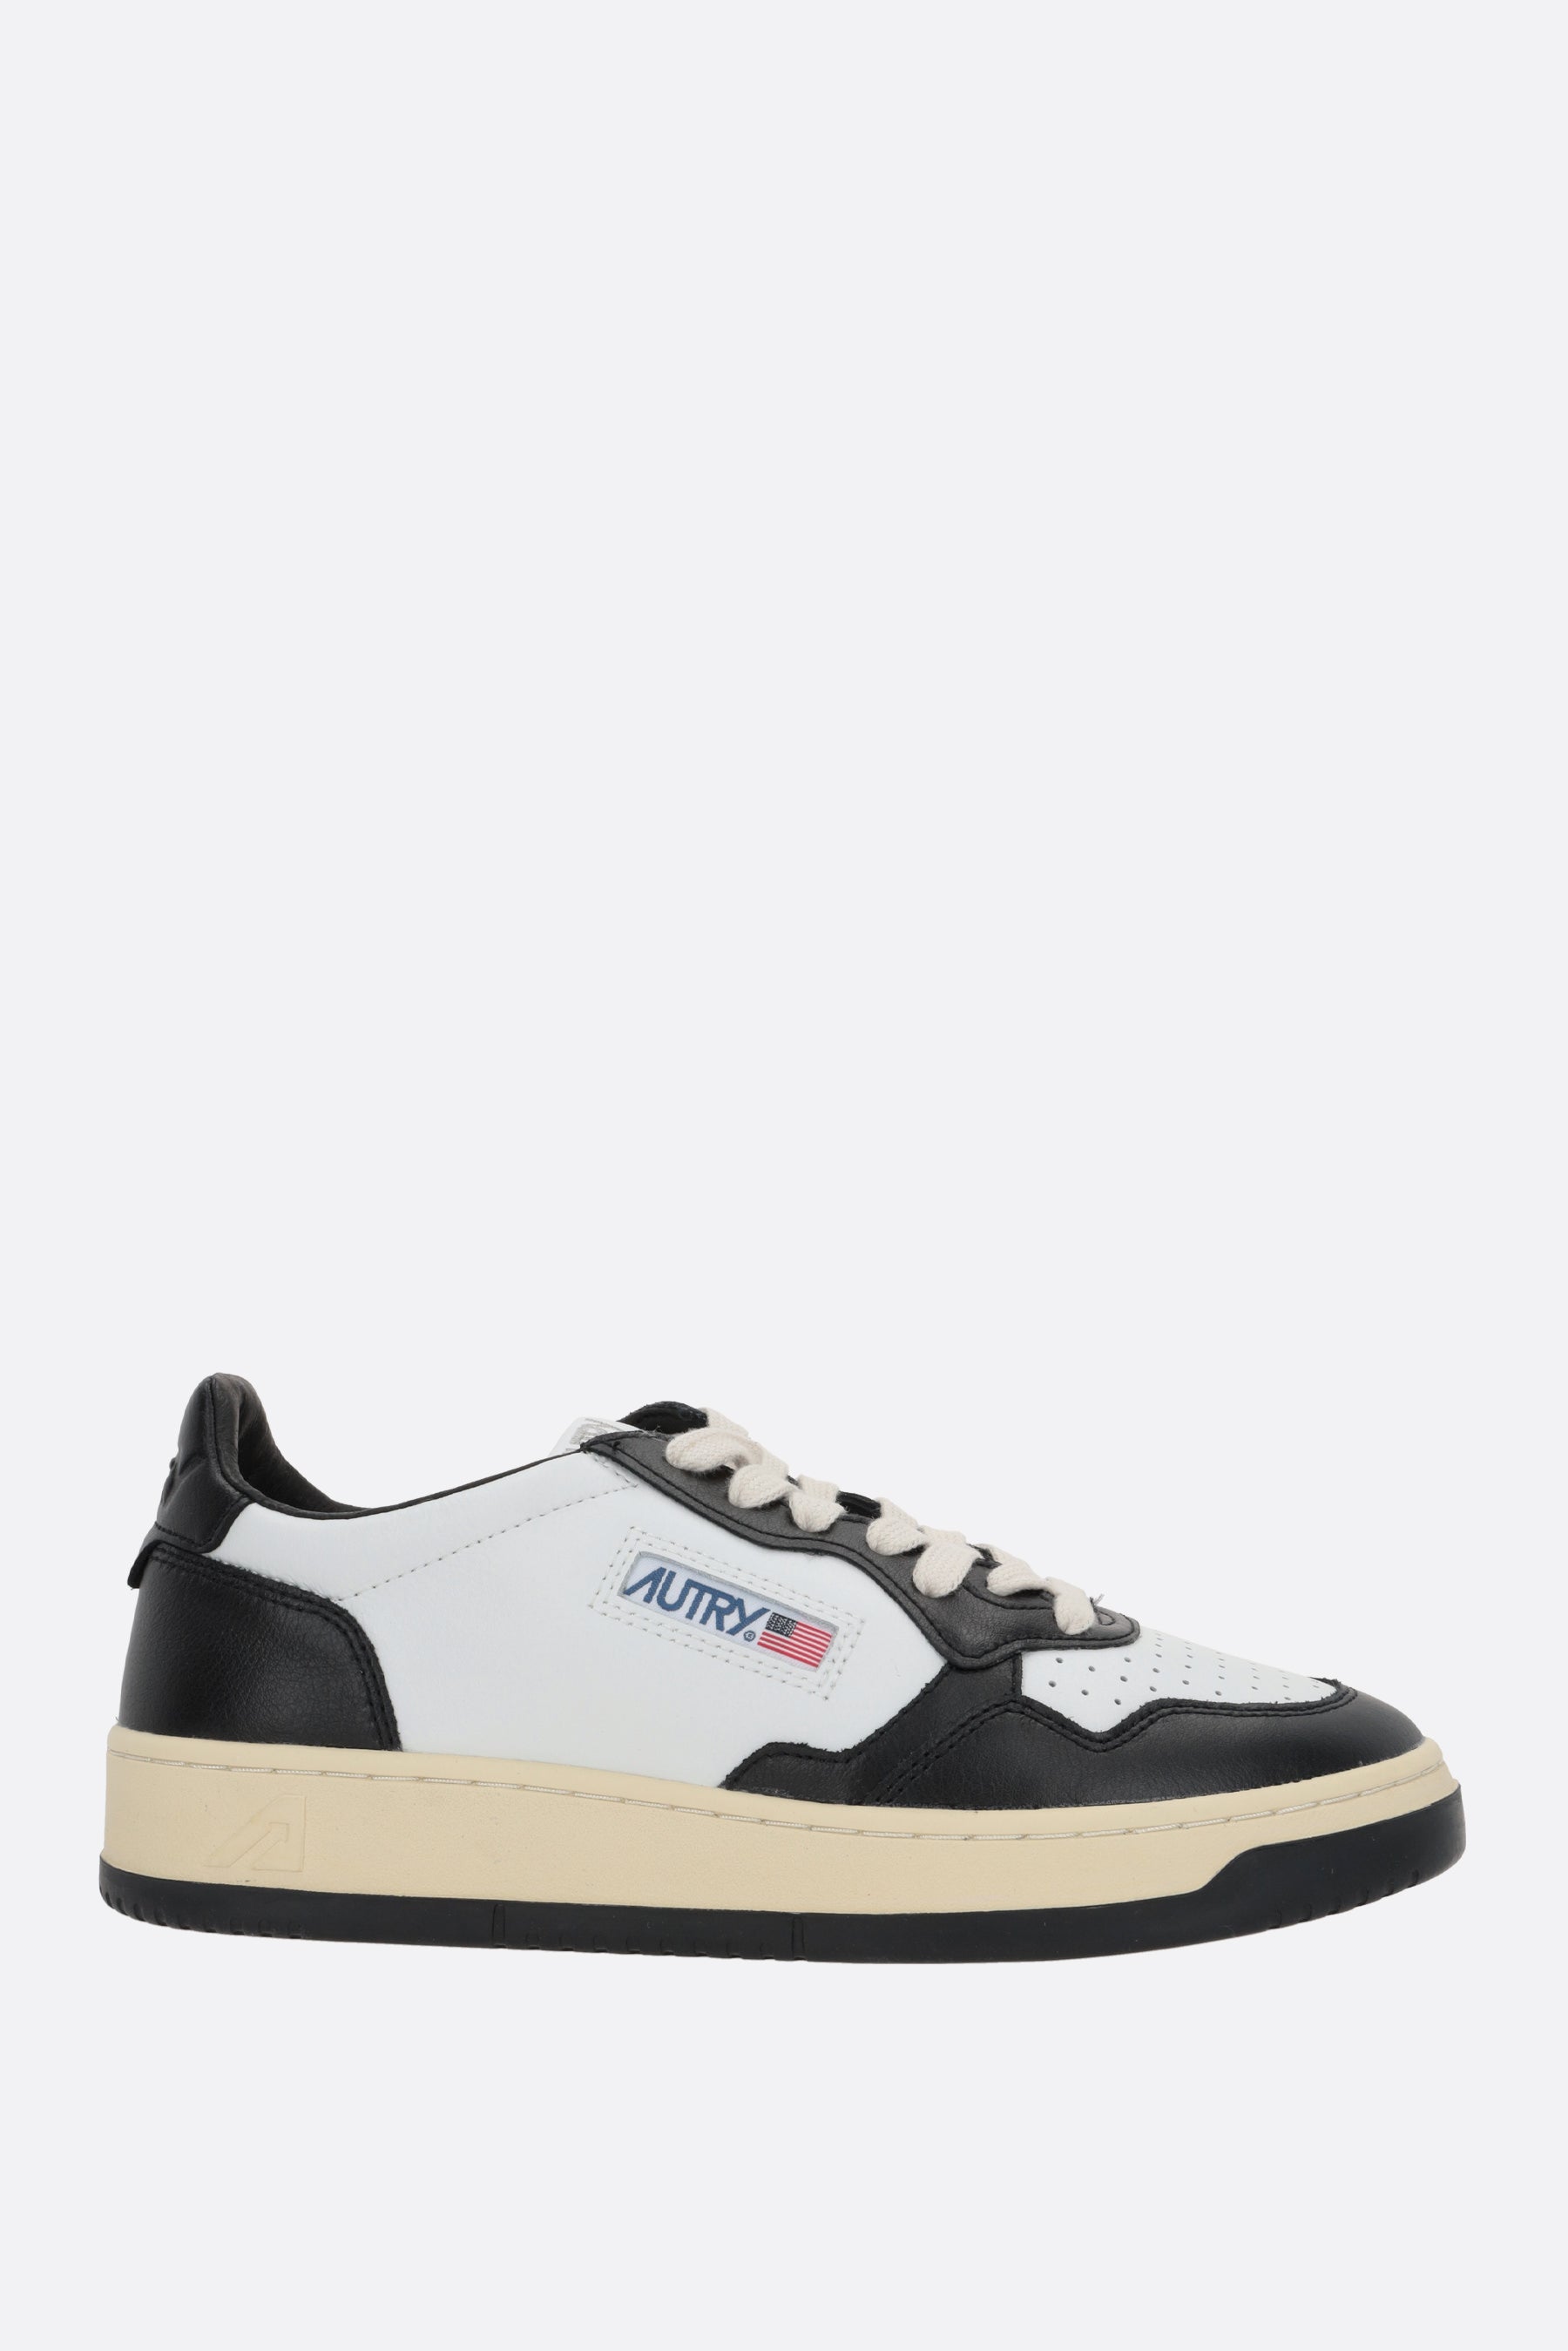 Autry Medalist smooth leather sneakers